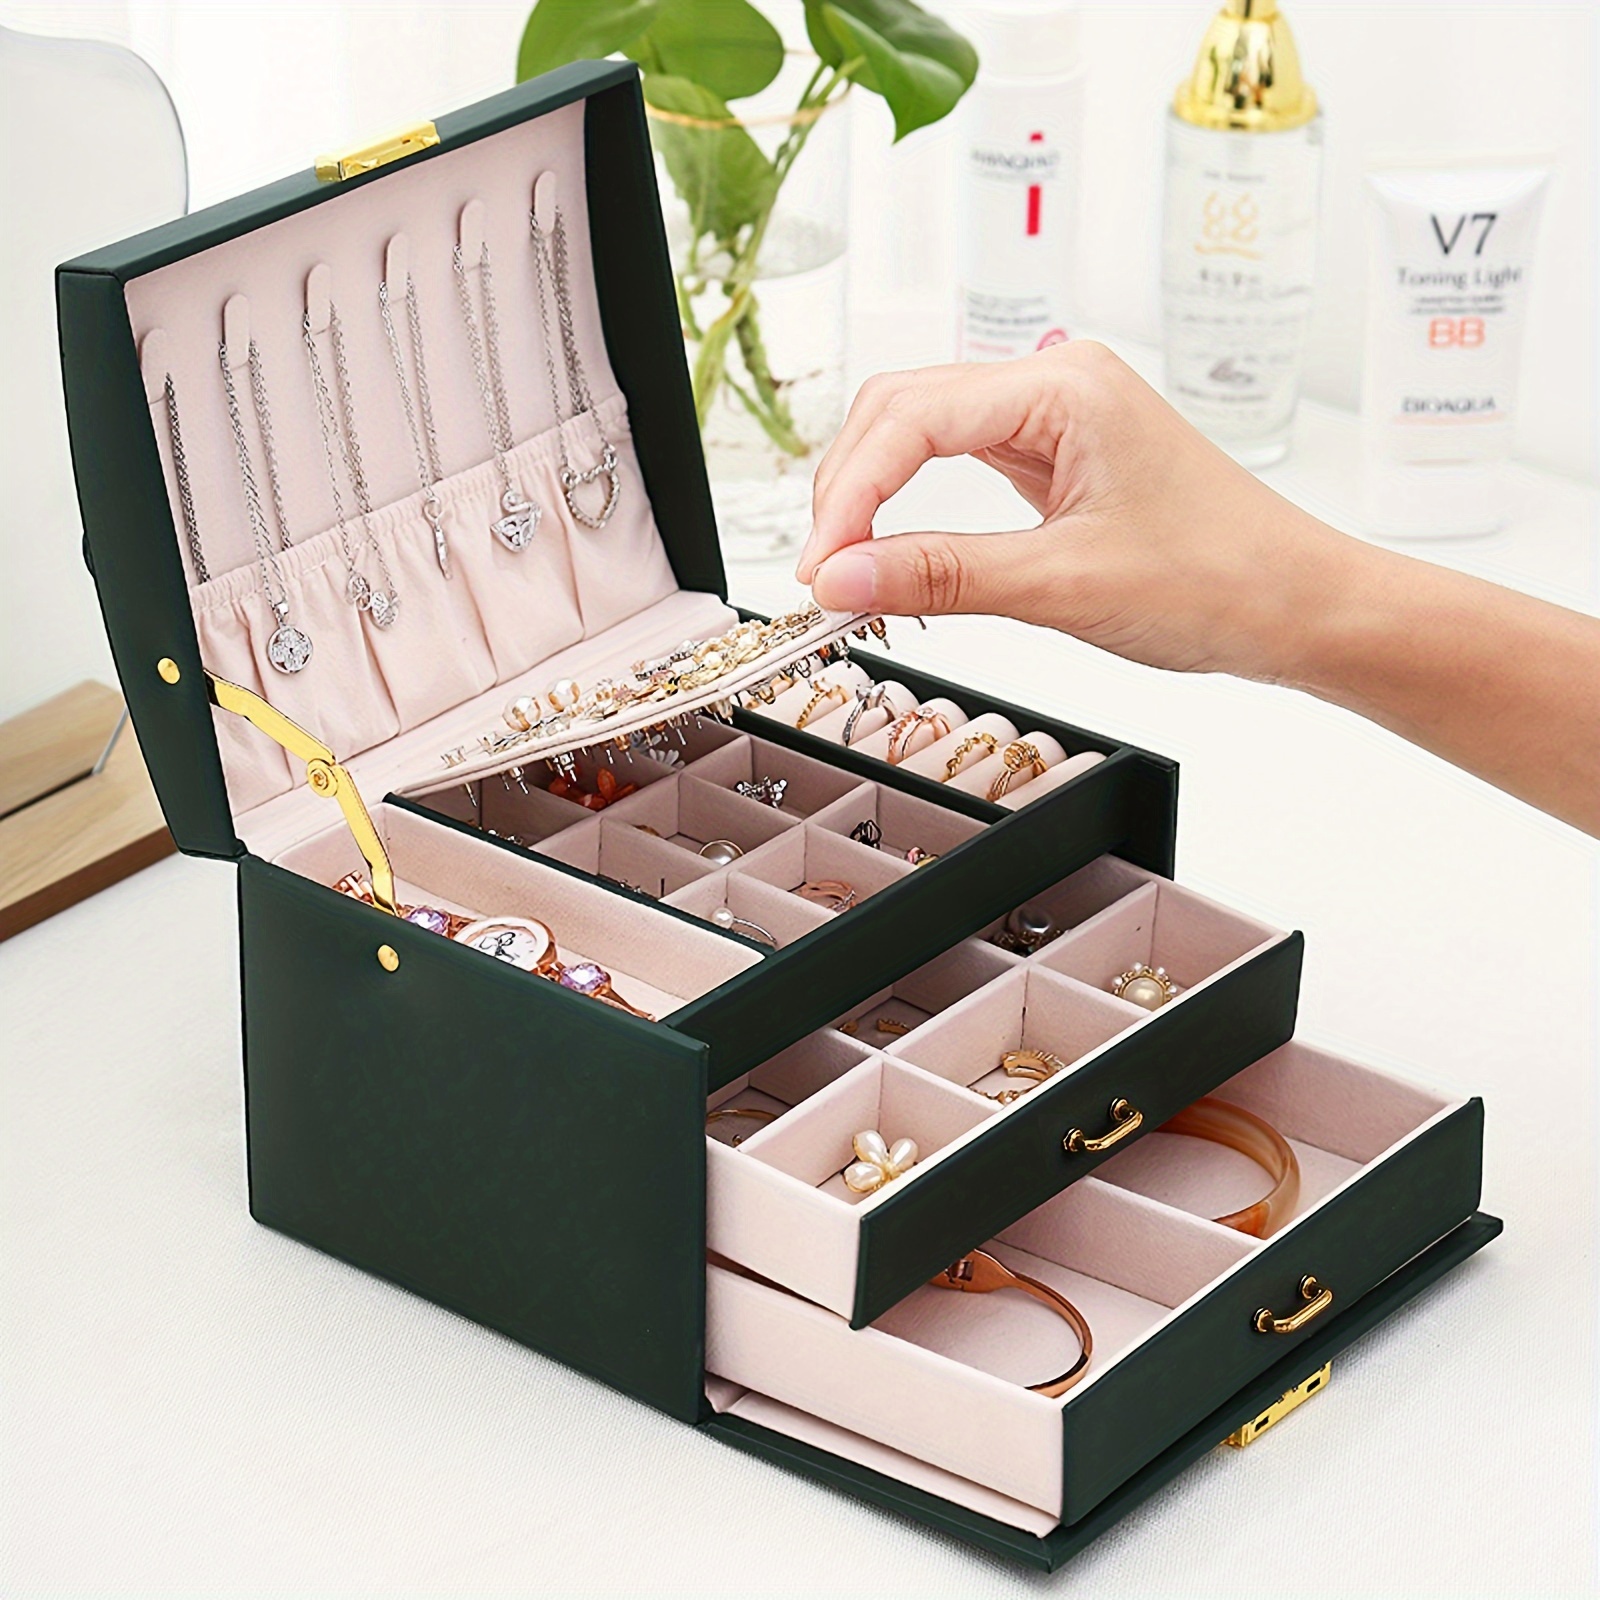 

1 Pcs 3 Layer Travel Jewelry Organizer Box, Jewelry Box For Vacation, Travel Jewelry Box Gifts For Women, Jewelry Storage Display Holder For Earrings,ring,necklaces,bracelets